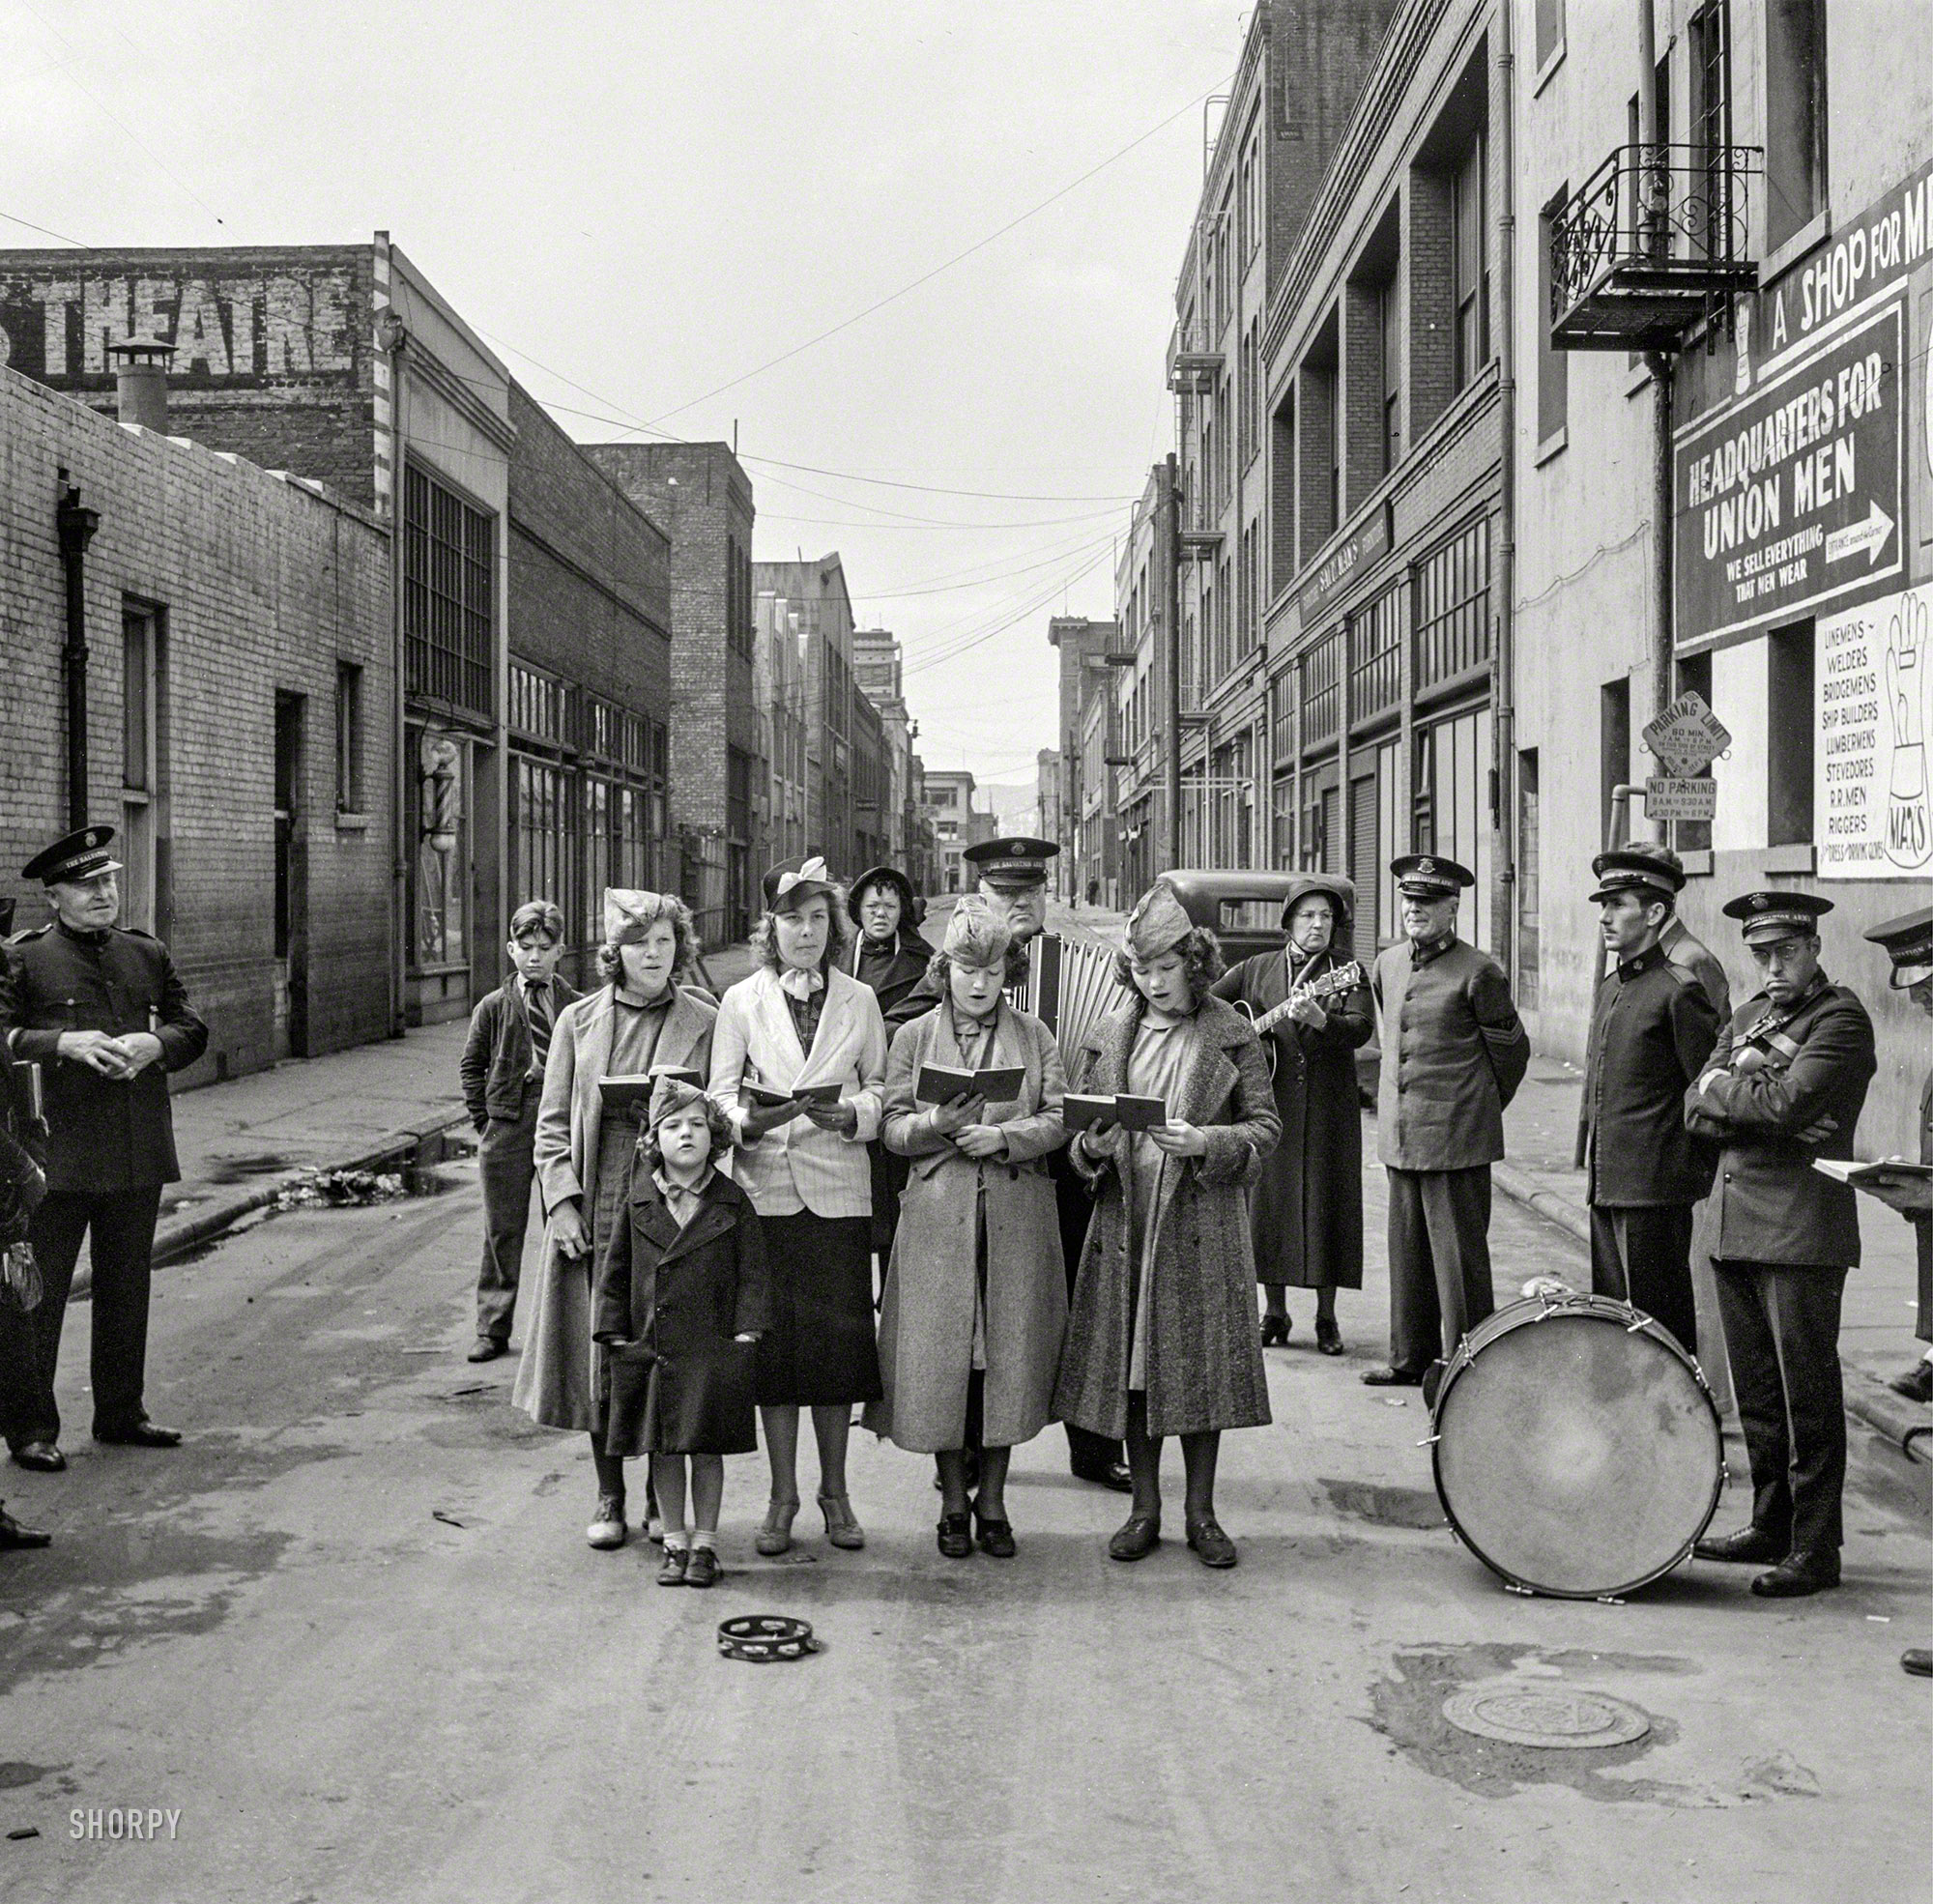 April 1939. "Salvation Army, San Francisco, California. At Minna Street the army forms a semicircle, girls' Sunday school class sings between preaching to attract a crowd." Medium format negative by Dorothea Lange. View full size.